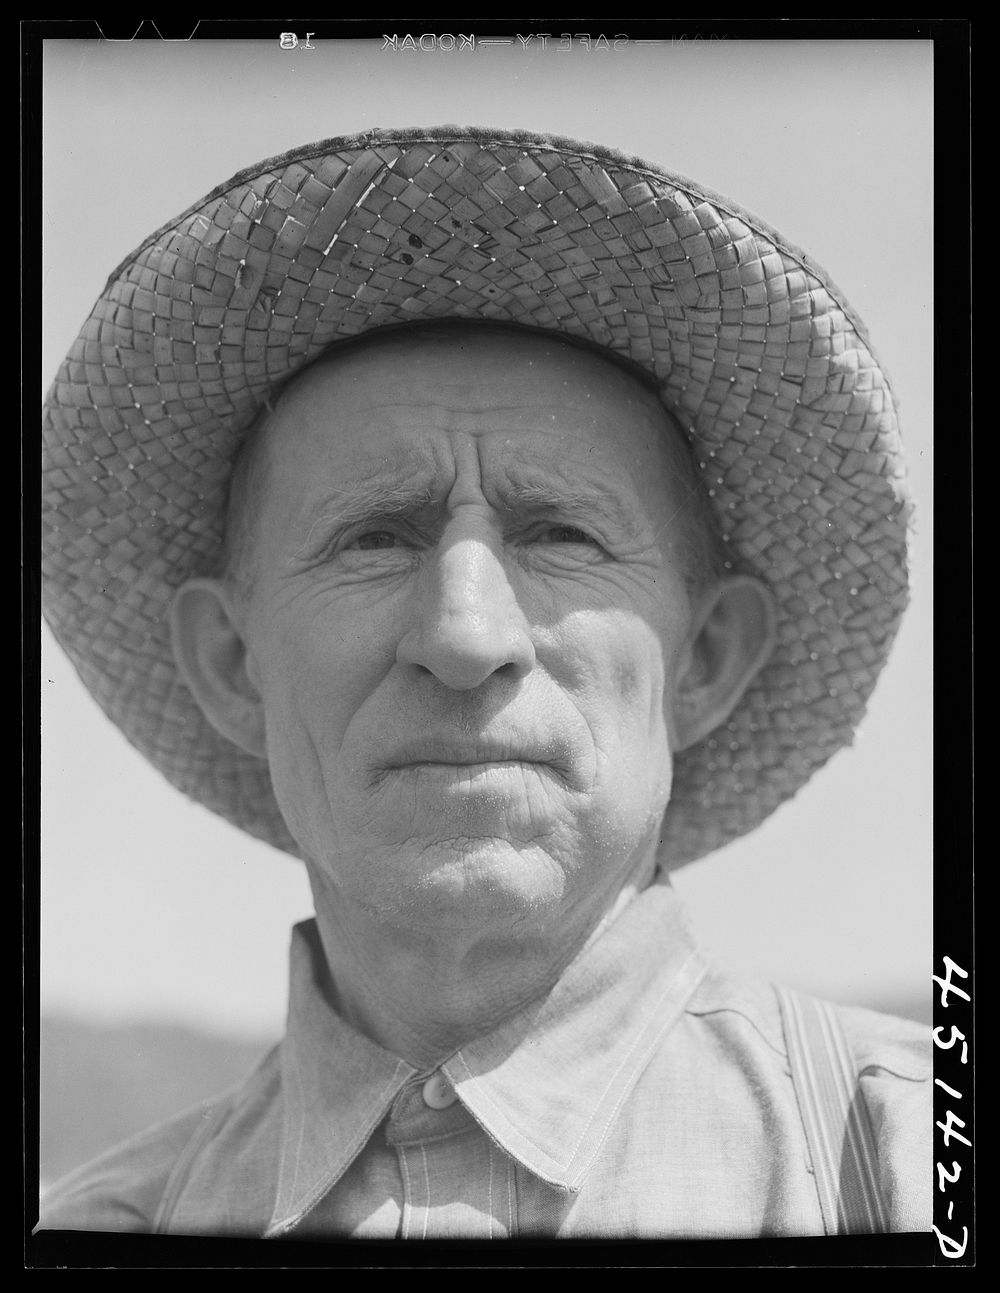 [Untitled photo, possibly related to: Gathering hay on the farm of Emanuel Rink, FSA (Farm Security Administration) dairy…